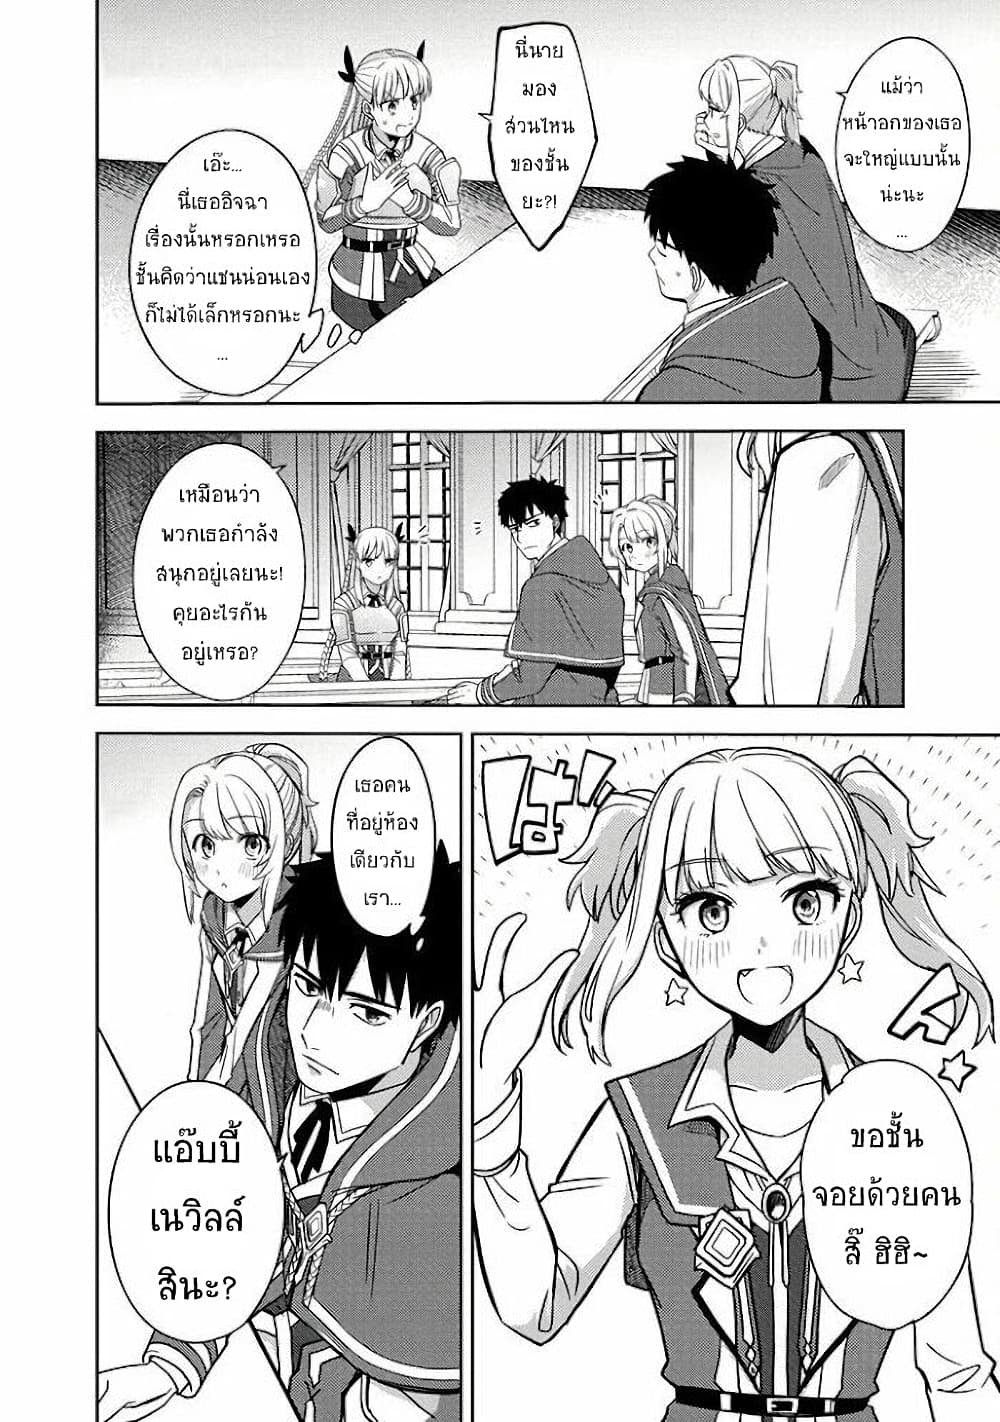 The Reincarnated Swordsman With 9999 Strength Wants to Become a Magician! ตอนที่ 5 (10)